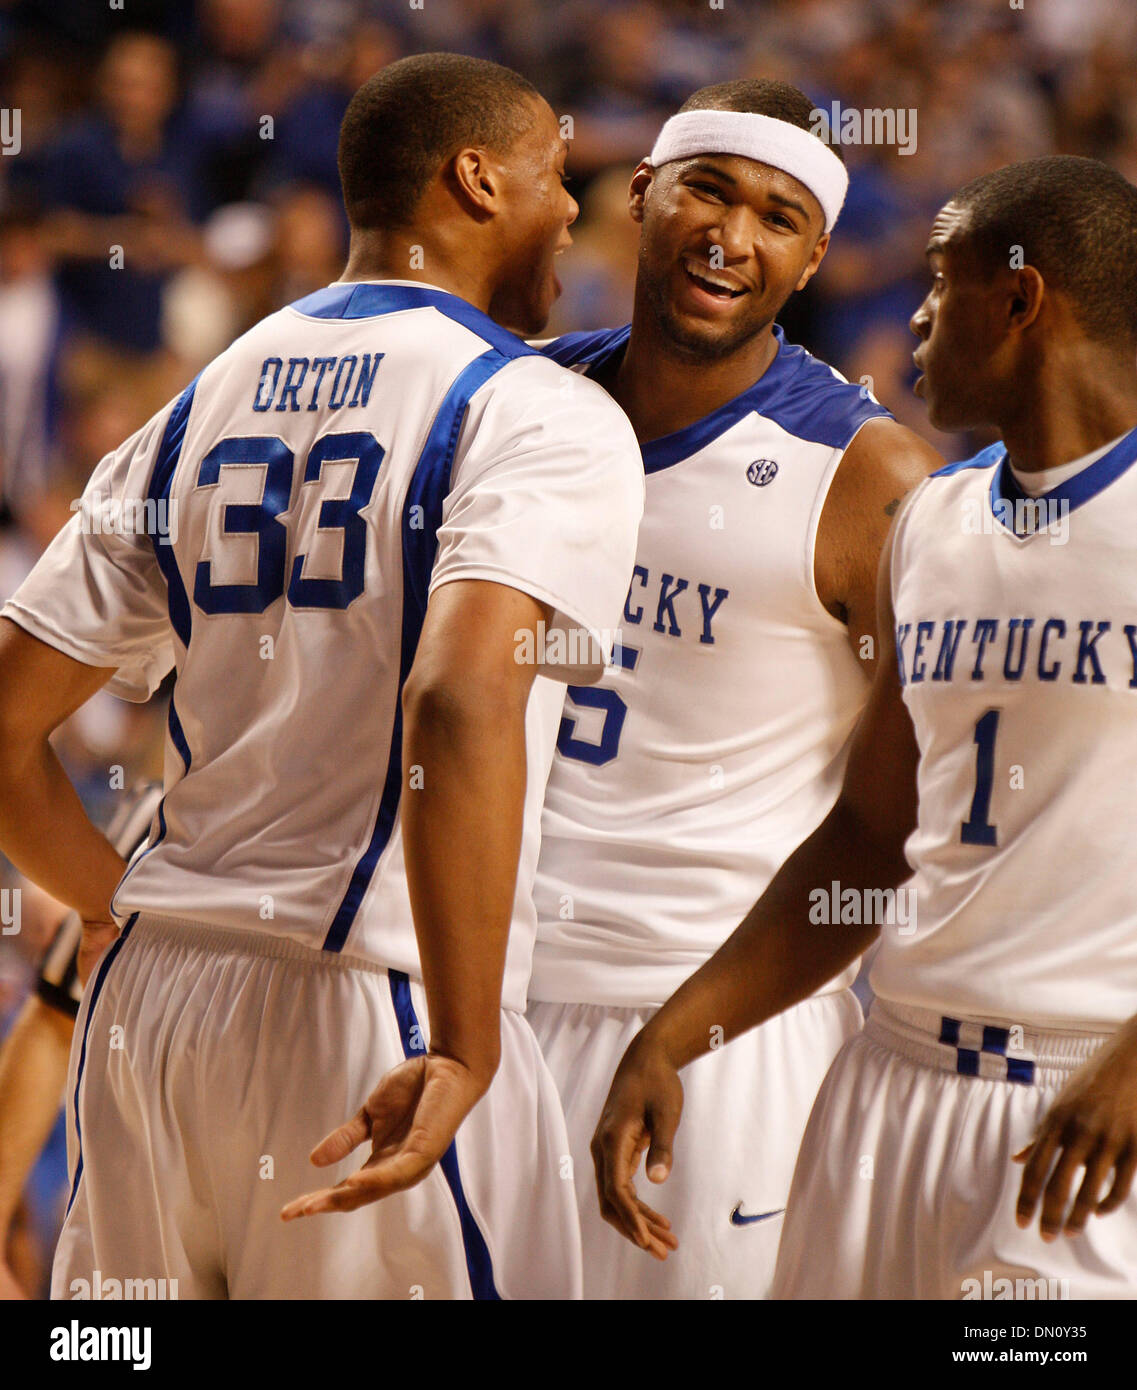 Jan. 30, 2010 - Lexington, Kentucky, USA - UK's DeMarcus Cousins, center,  smiled in the first half as he was sent to the free throw line during the University of Kentucky vs. Vanderbilt game on Saturday, Jan. 30, 2010 at Rupp Arena in Lexington, Ky.  At left is Daniel Orton and at right is Darius Miller.  Photo by David Perry | Staff (Credit Image: © Lexington Herald-Leader/ZUMApr Stock Photo